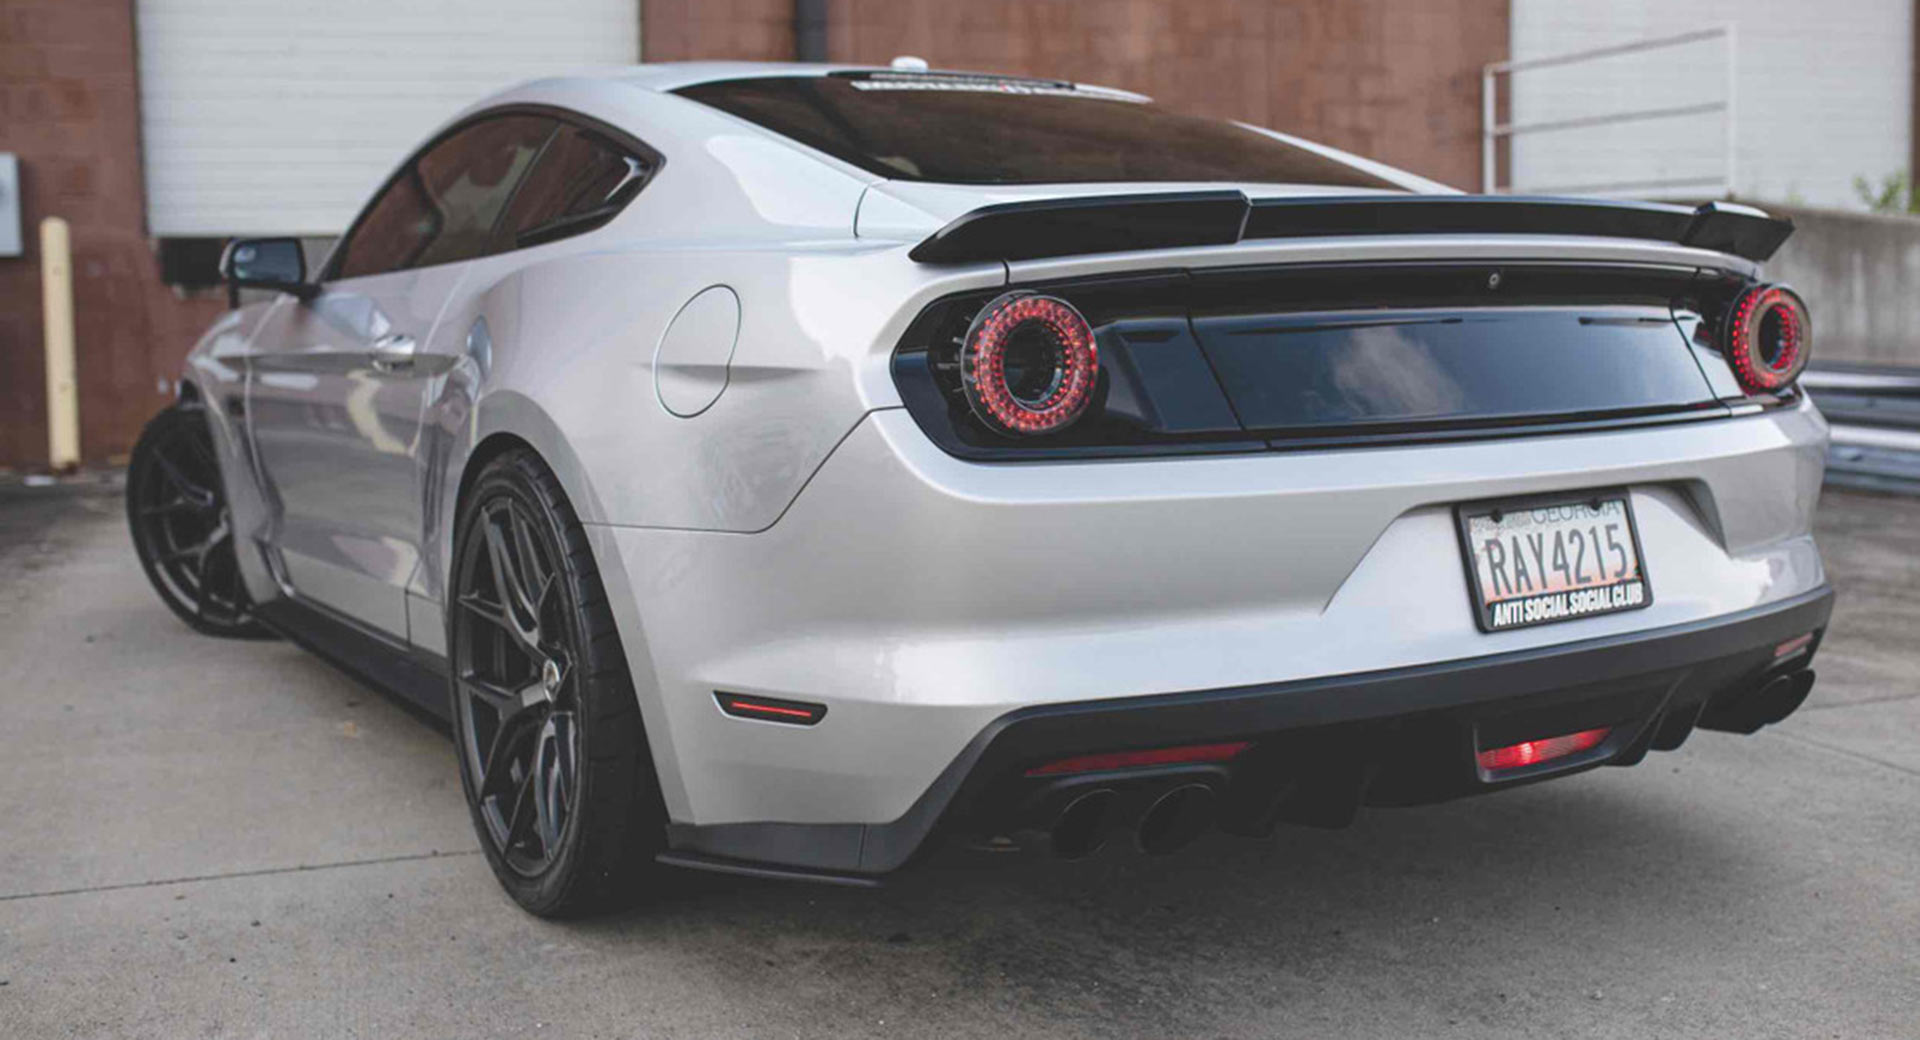 Fitting Ferrari-Style To A Mustang Could Forgiven – Adding A Horse, Not | Carscoops